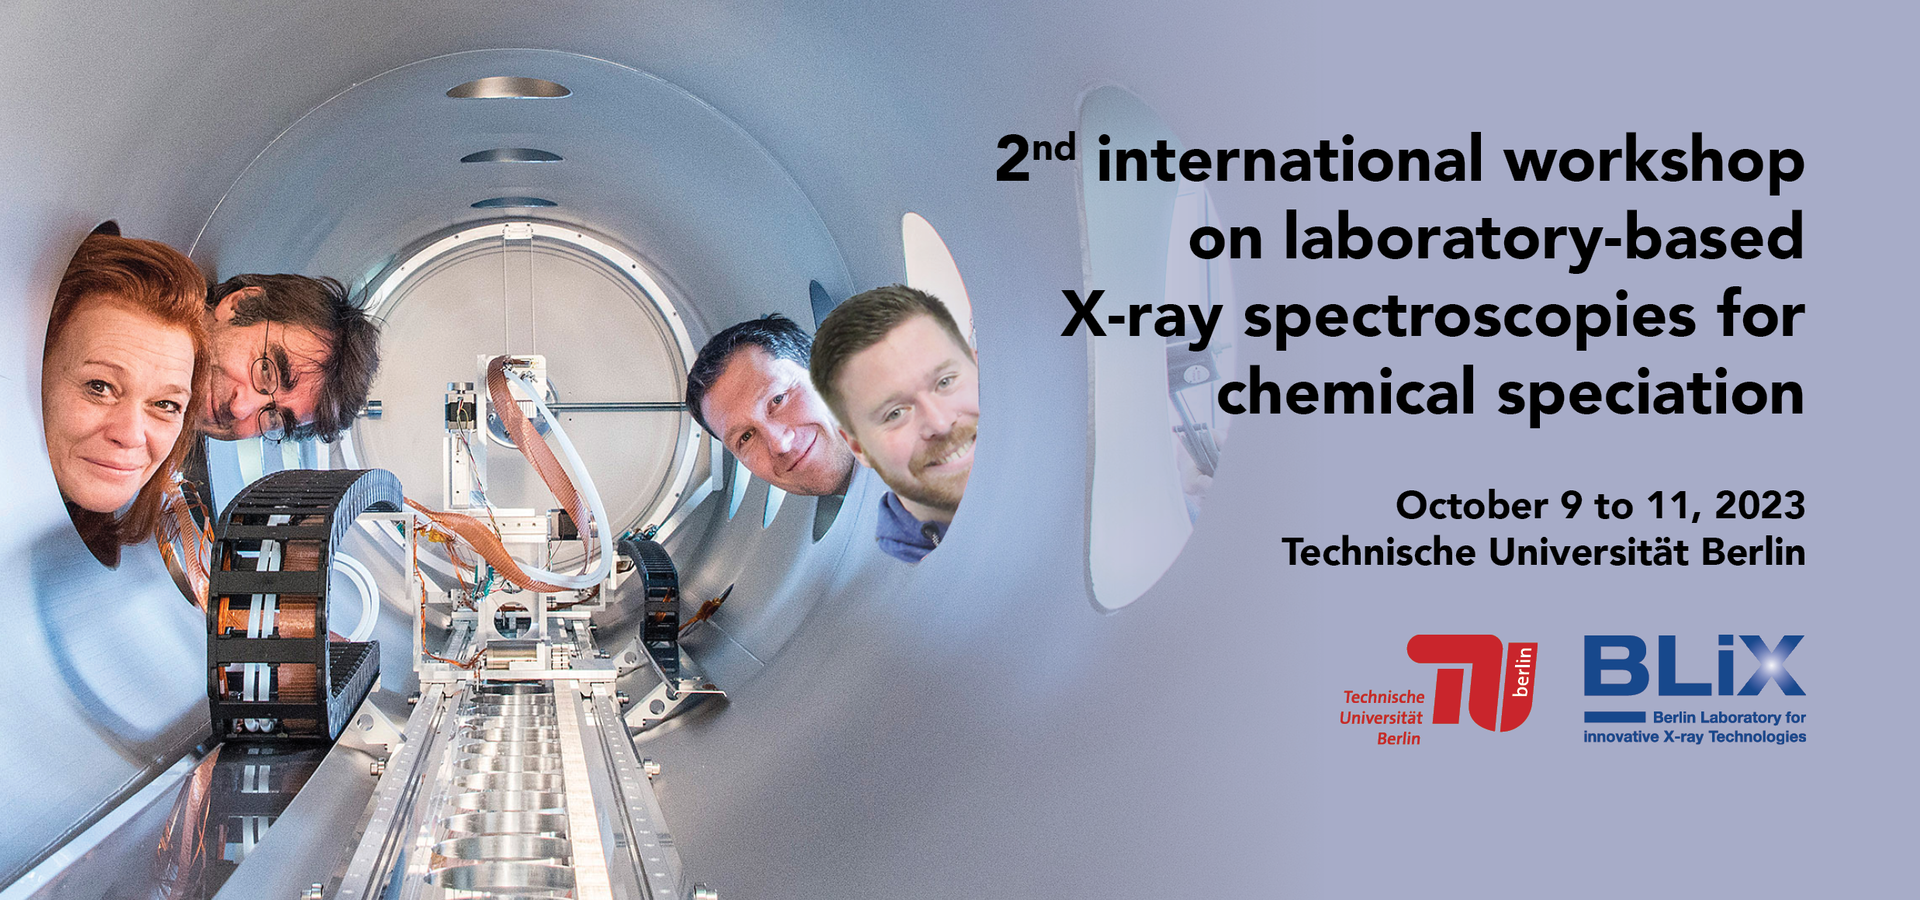 2nd international workshop on laboratory-based X-ray spectroscopies for chemical speciation